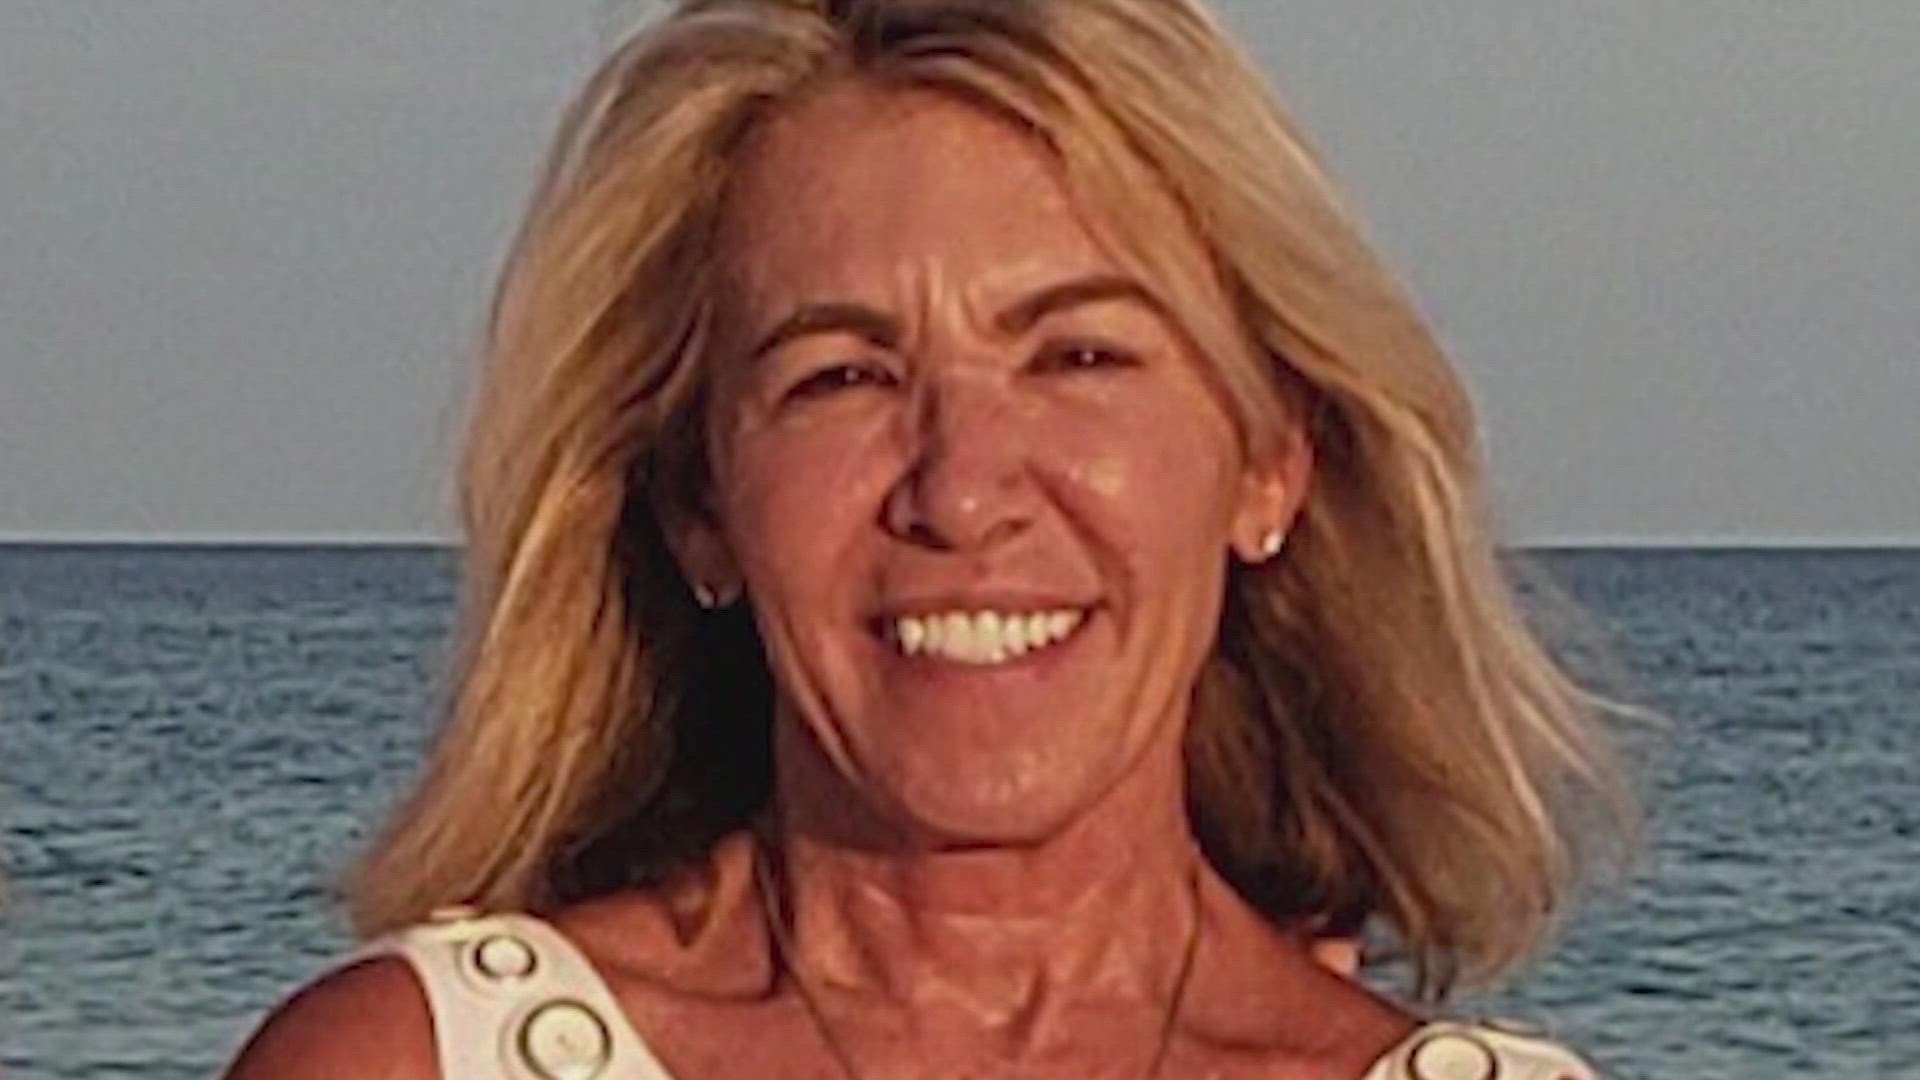 Texas EquuSearch resumed their search for Sherry Noppe Thursday at George Bush Park. Searchers spread out through the 2,700-acre park on ATVs and on foot.